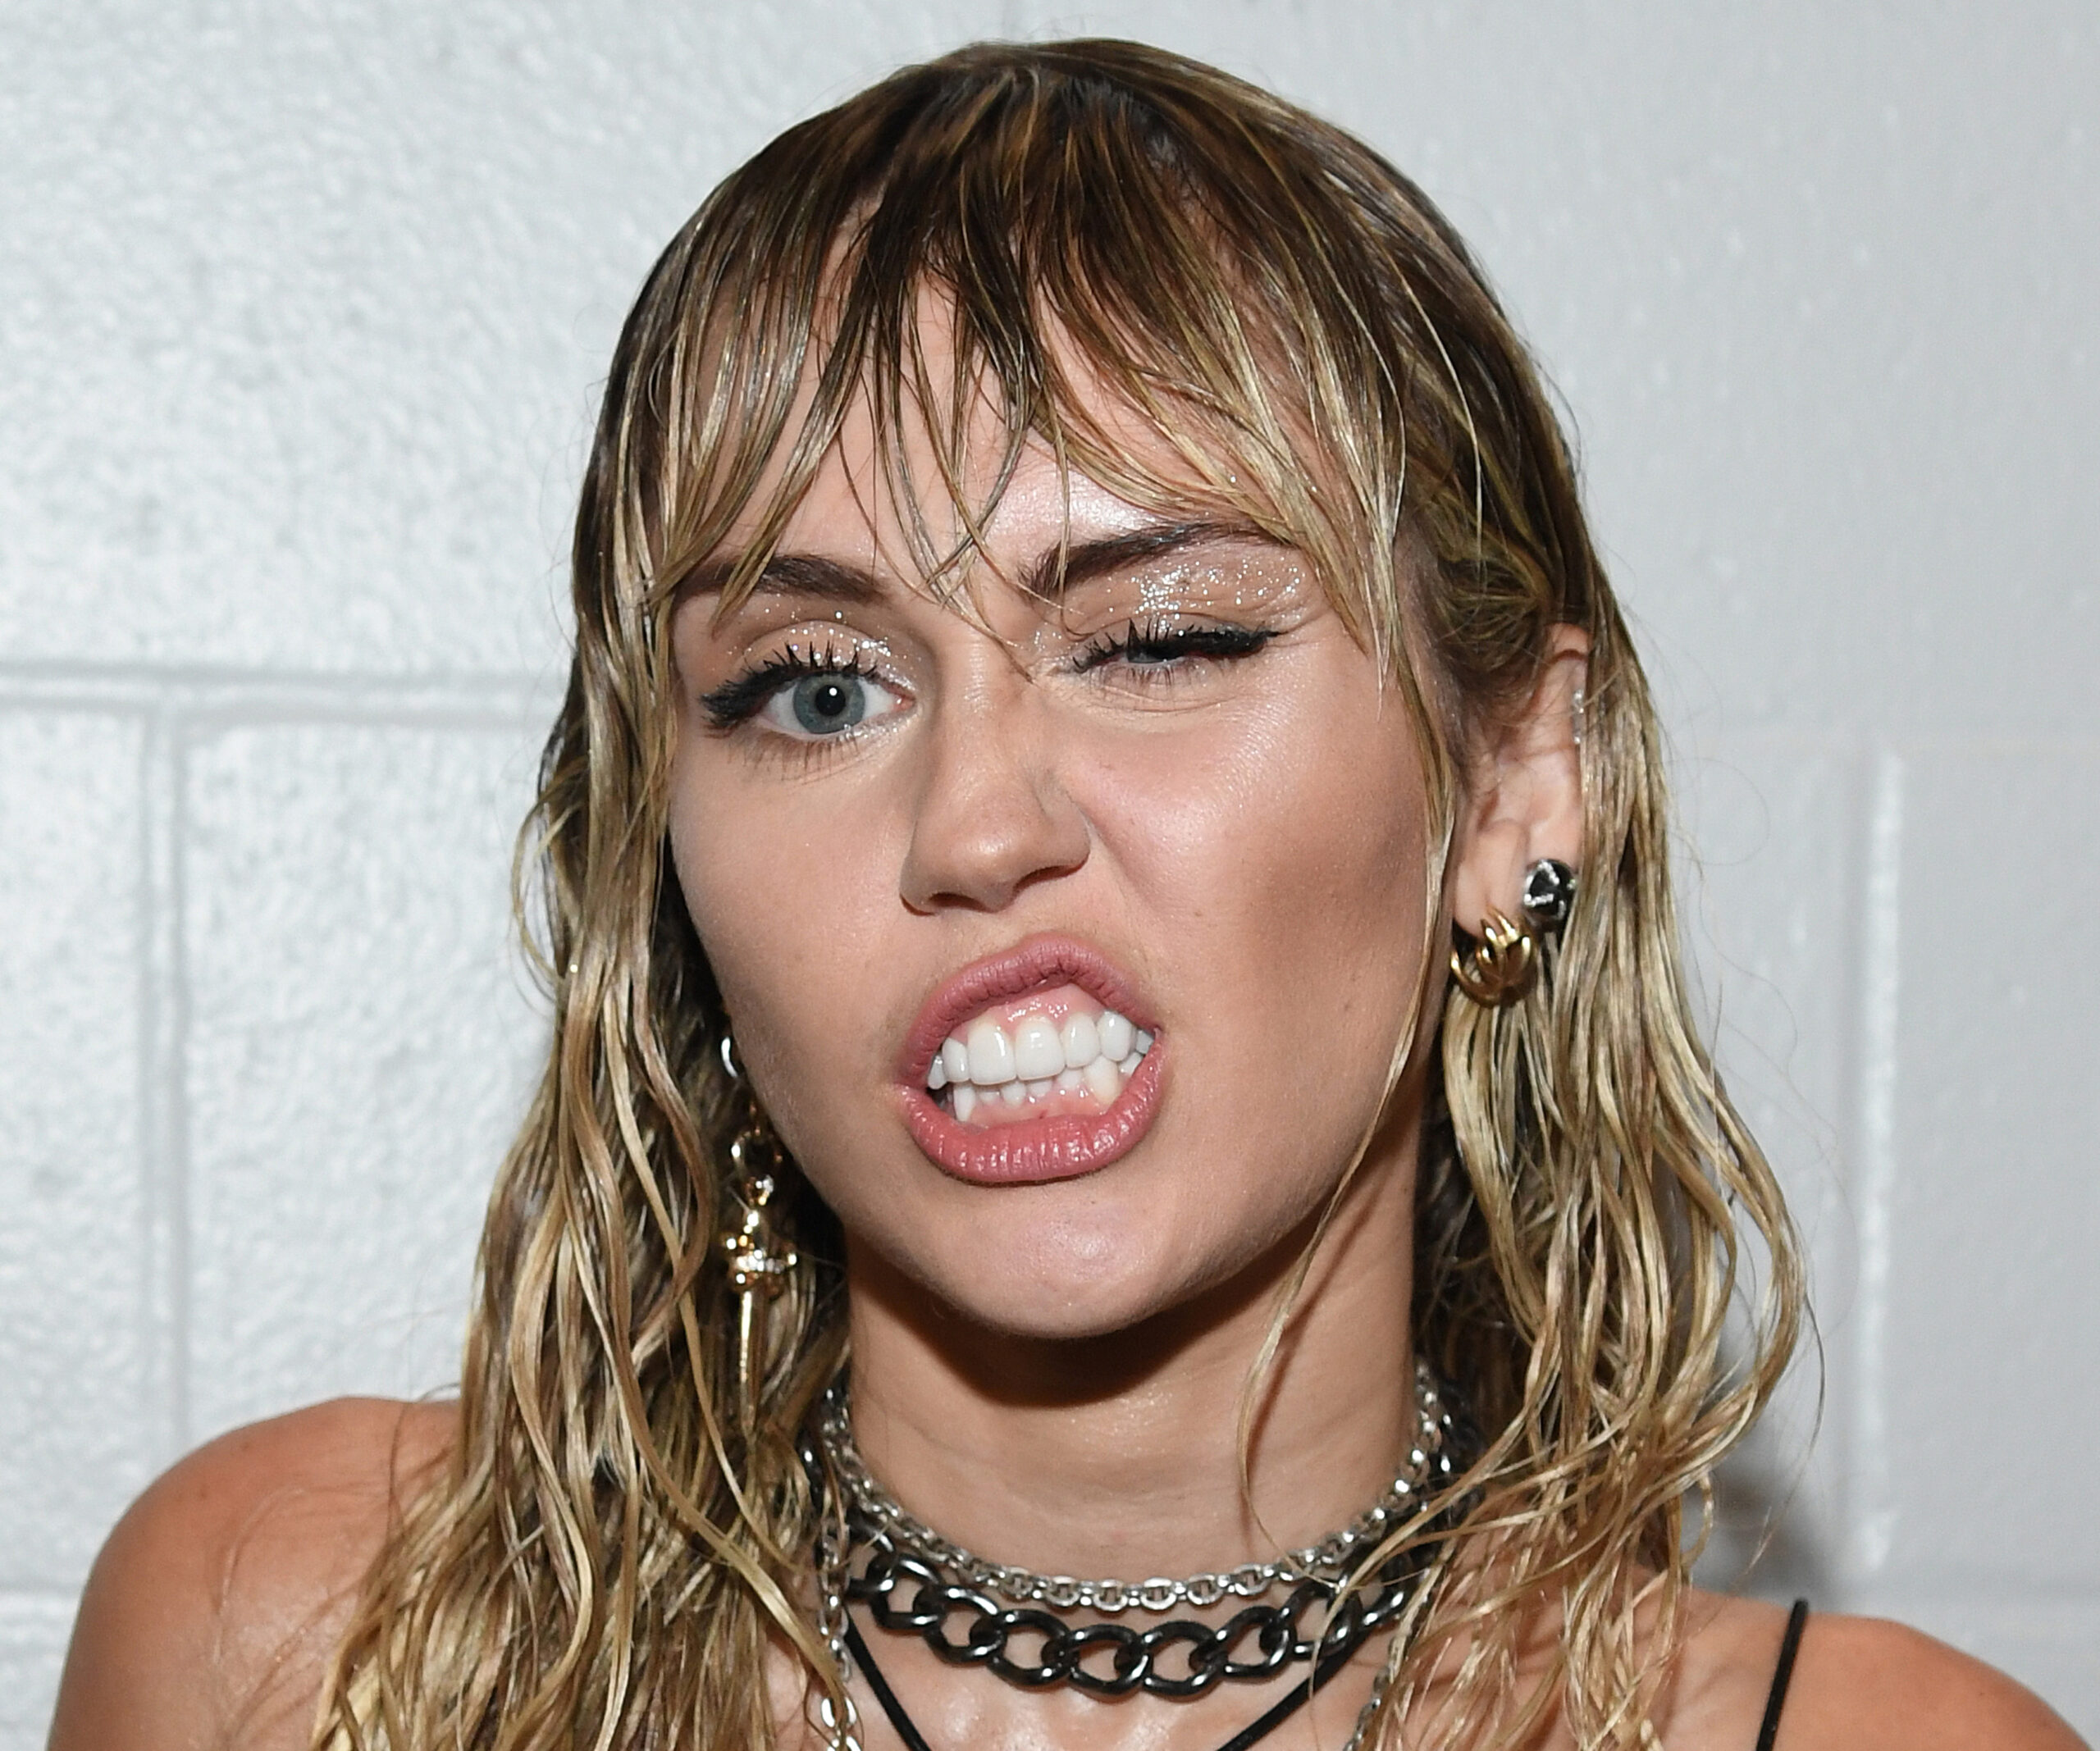 We just got a close-up look at Miley Cyrus’ new breakup tattoo